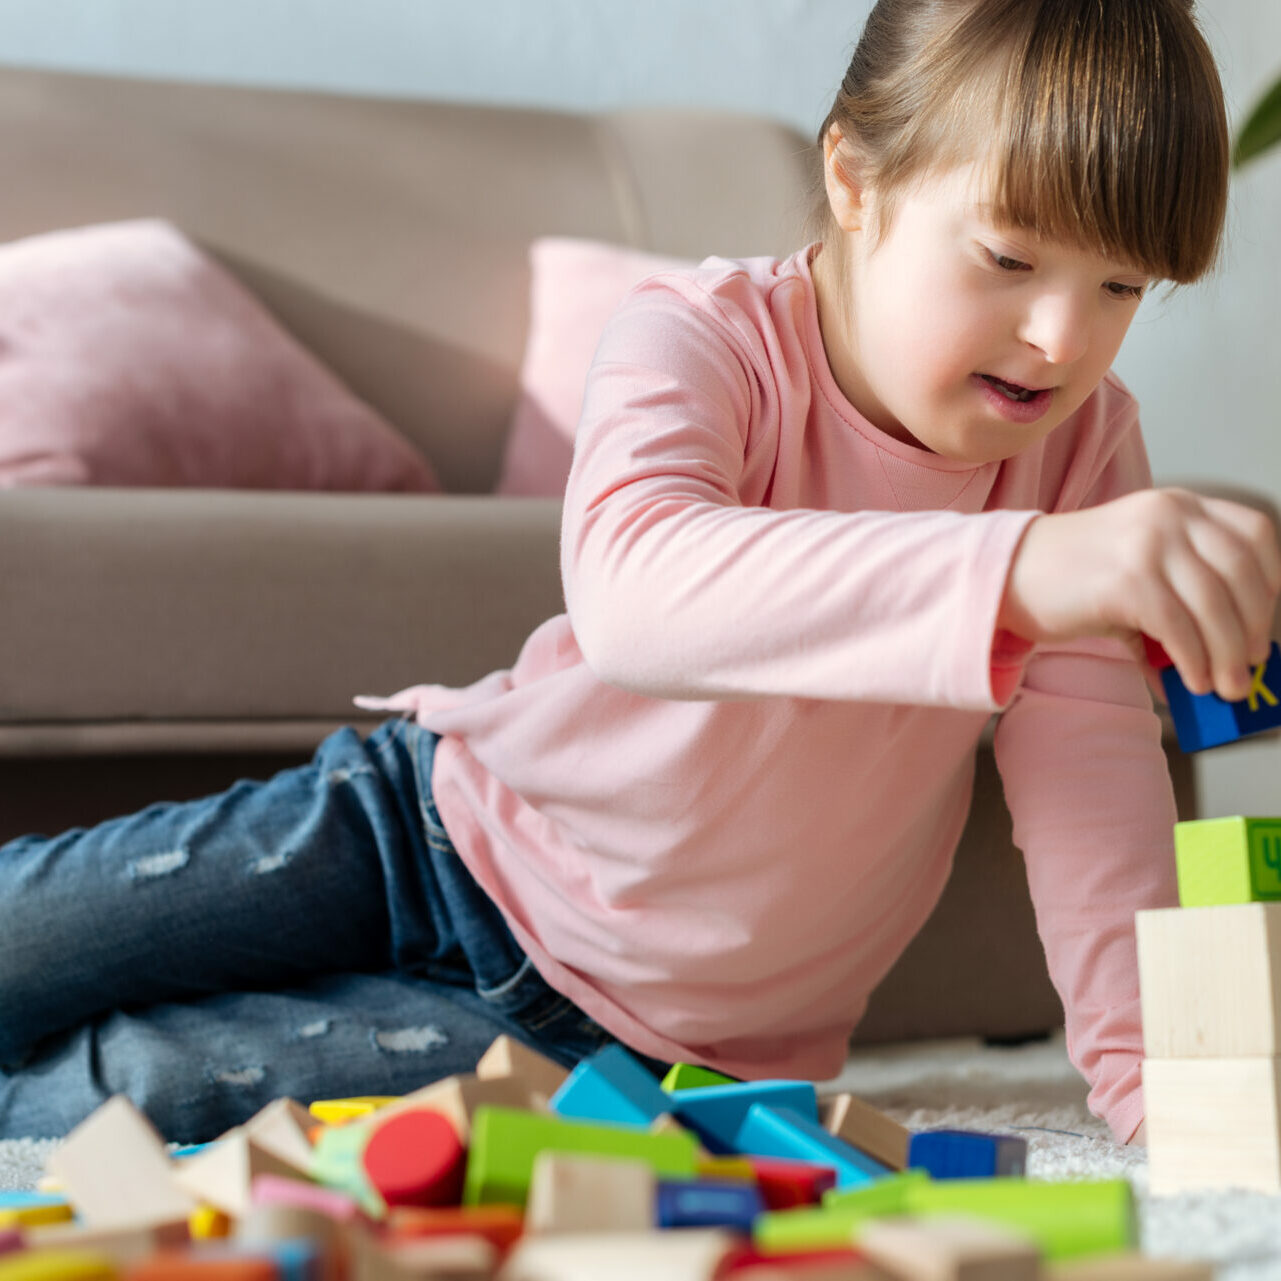 Child with down syndrome playing with toy cubes on floor in cozy room